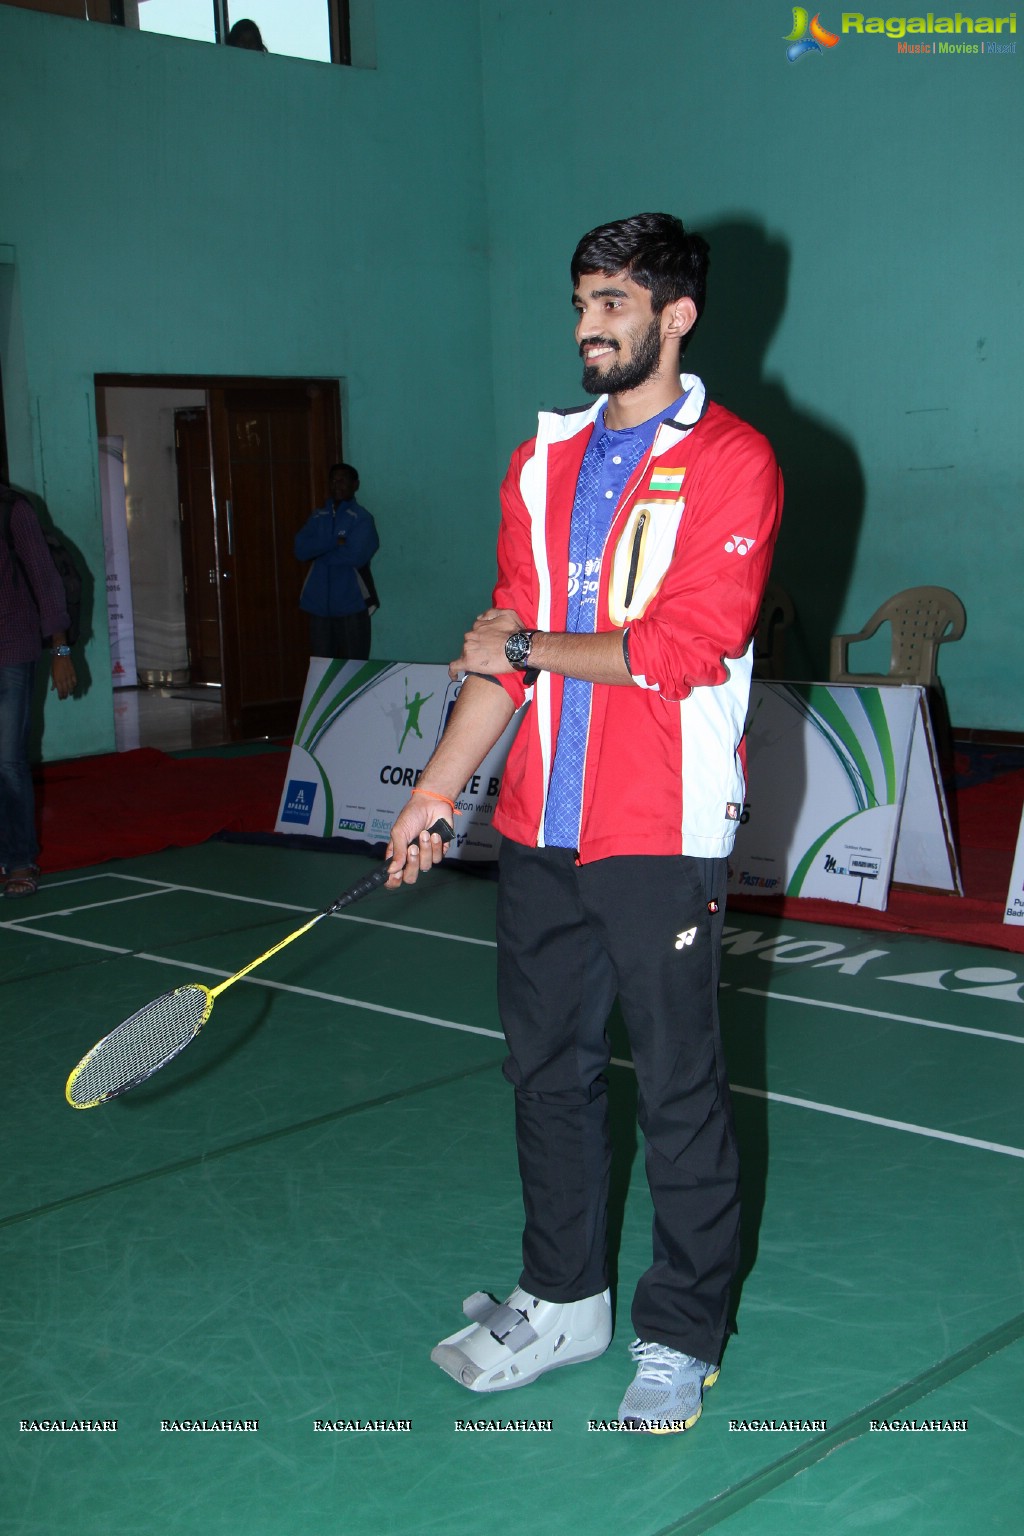 4th Edition of CDK Global’s Corporate Badminton League (CBL) 2016 at Pullela Gopichand Badminton Academy